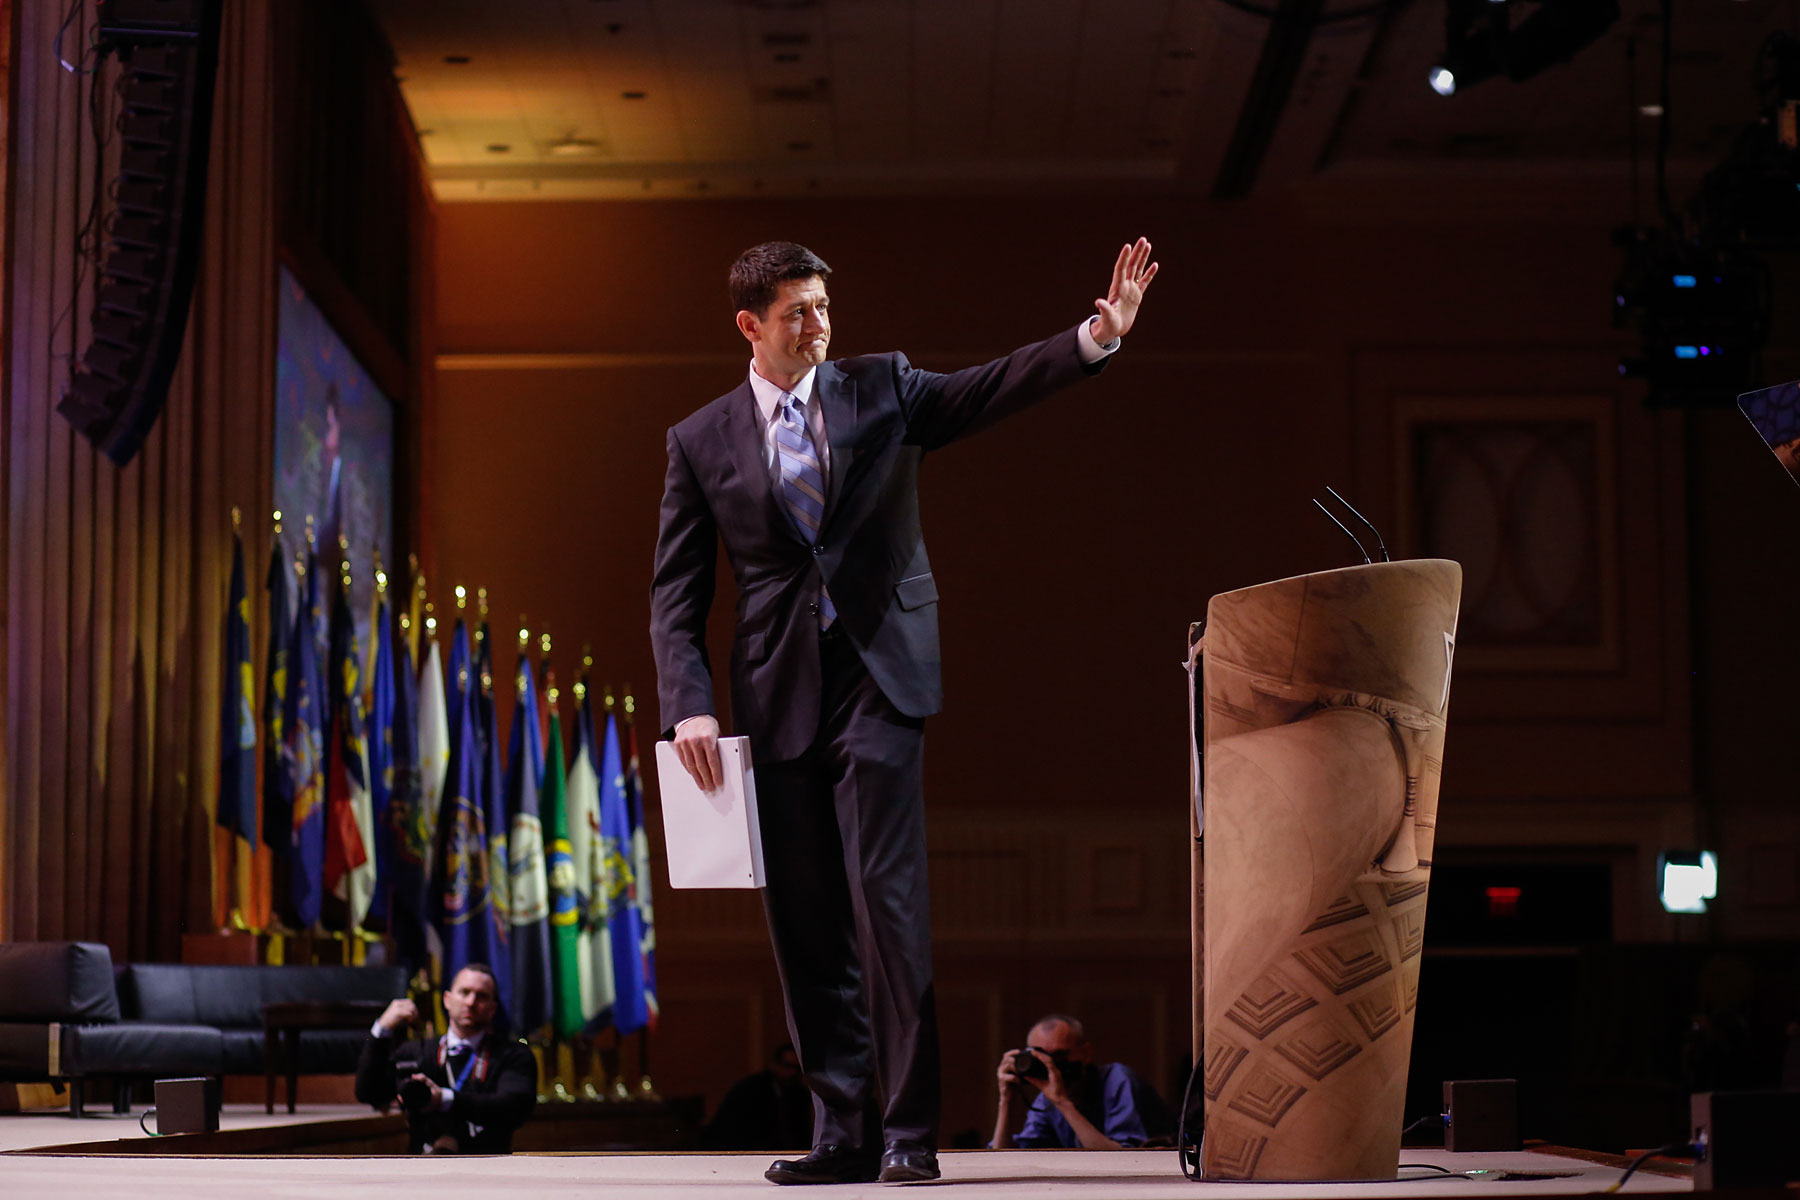 Congressman Paul Ryan, of Wisconsin, waves to the crowd after speaking during the Conservative Political Action Conference at the Gaylord National Resort &amp; Convention Center in National Harbor, Md., March 6, 2014.